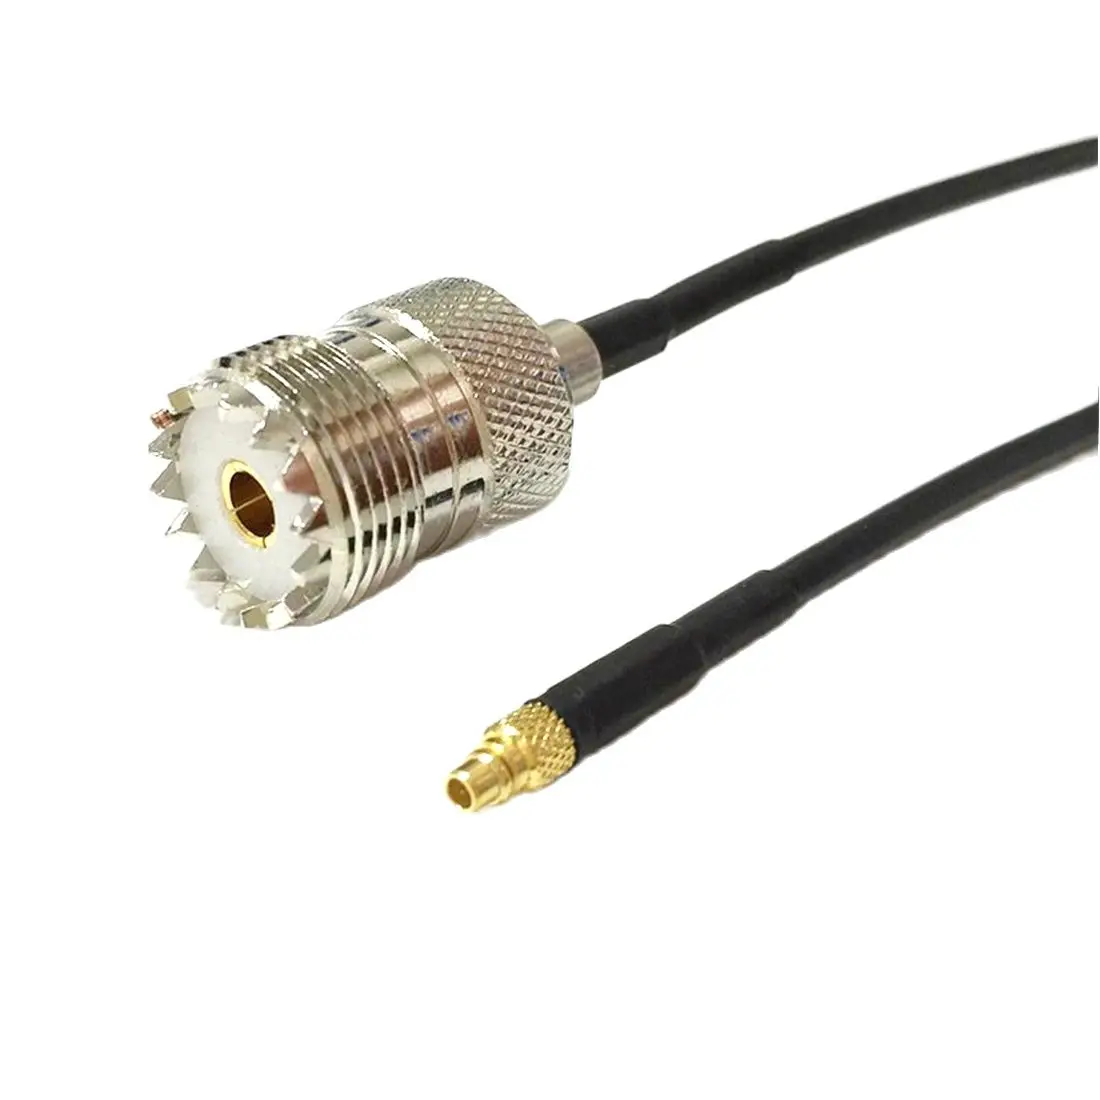 New Modem Coaxial Cable UHF Female Jack Connector Switch MMCX Male Plug Connector RG174 Cable 20CM 8inch Adapter